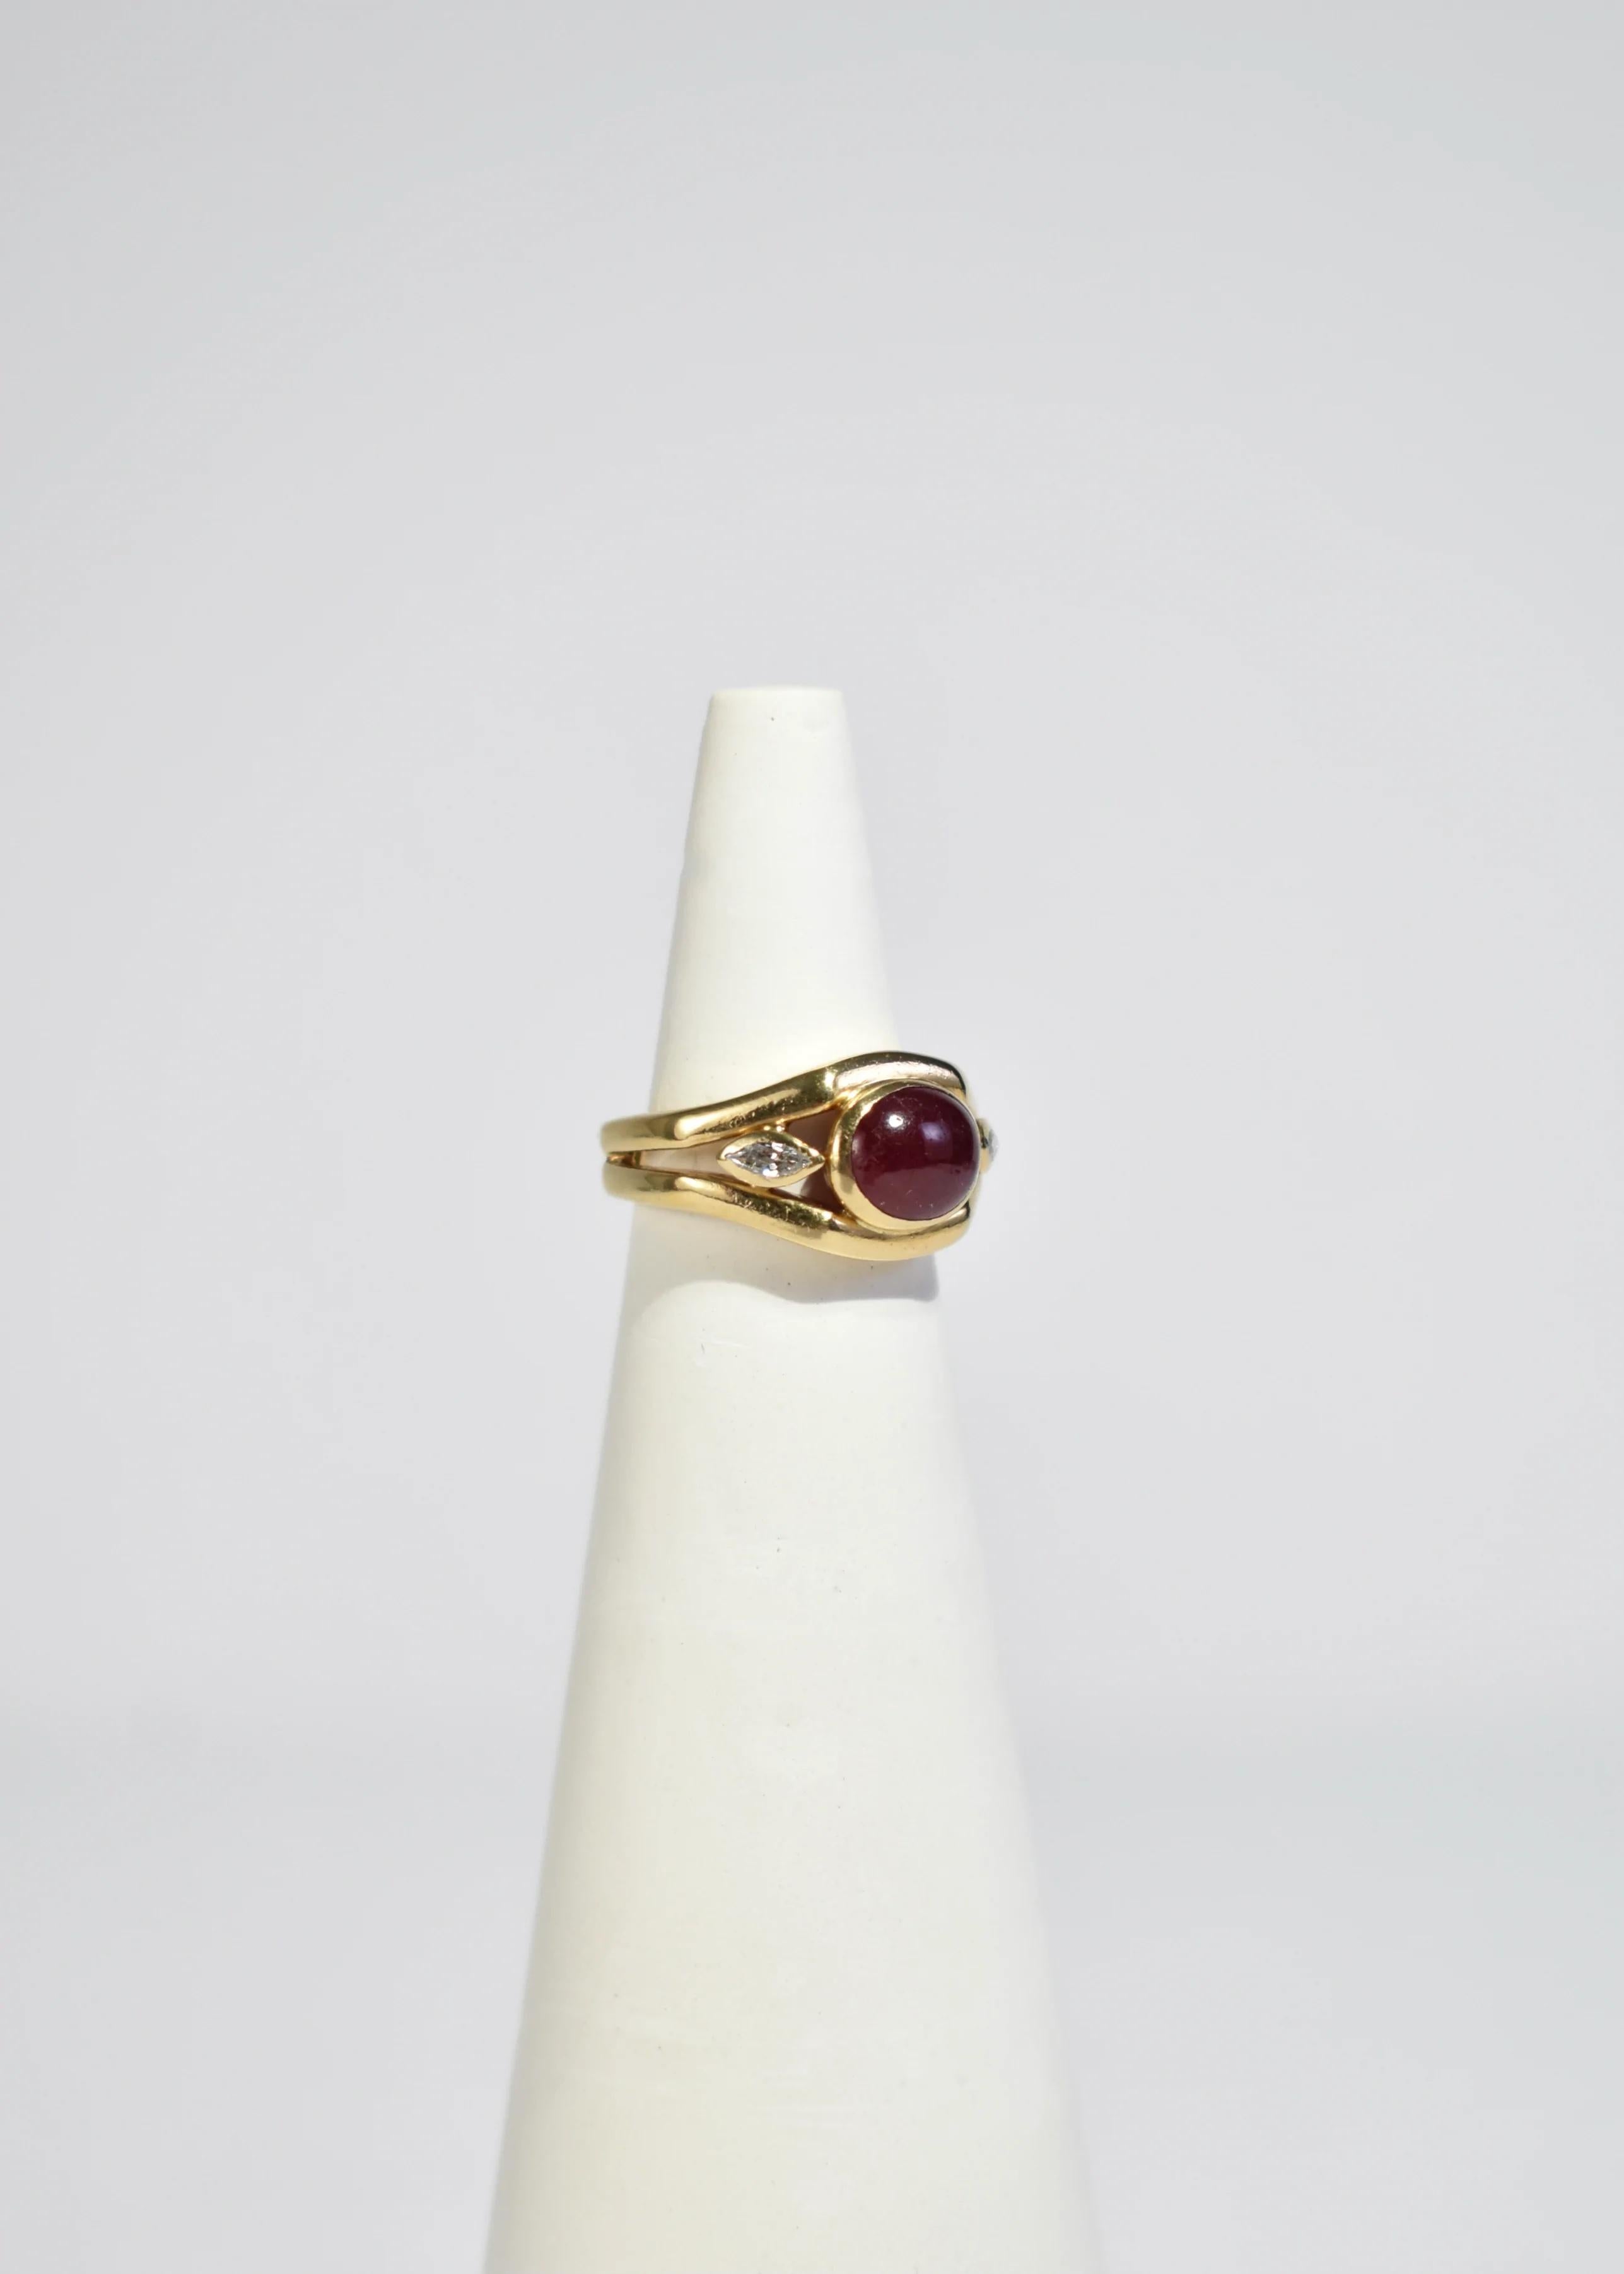 Stunning vintage gold ring featuring polished ruby cabochon and marquise cut diamonds. Stamped 18k.

Material: 18k gold, ruby, diamond.

We recommend storing in a dry place and periodic polishing with a cloth.